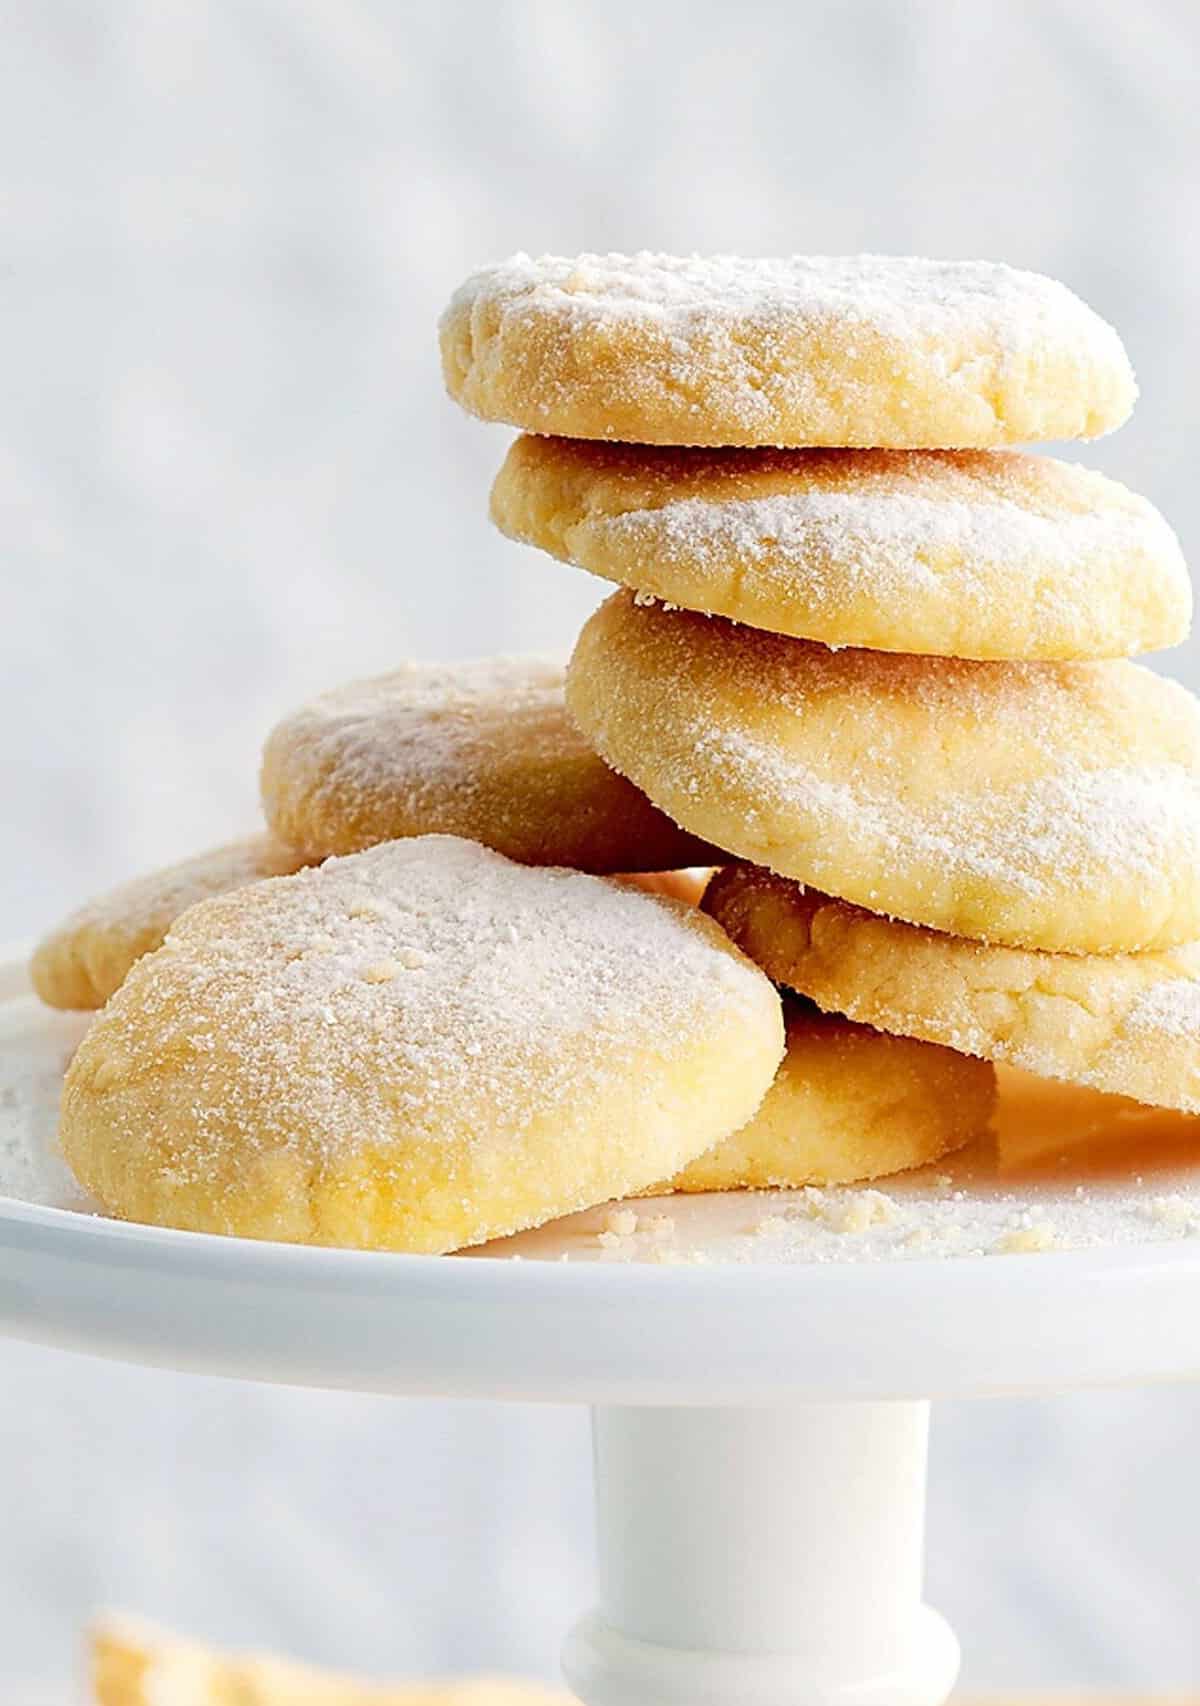  A plate full of tangy and buttery passionfruit shortbread cookies!